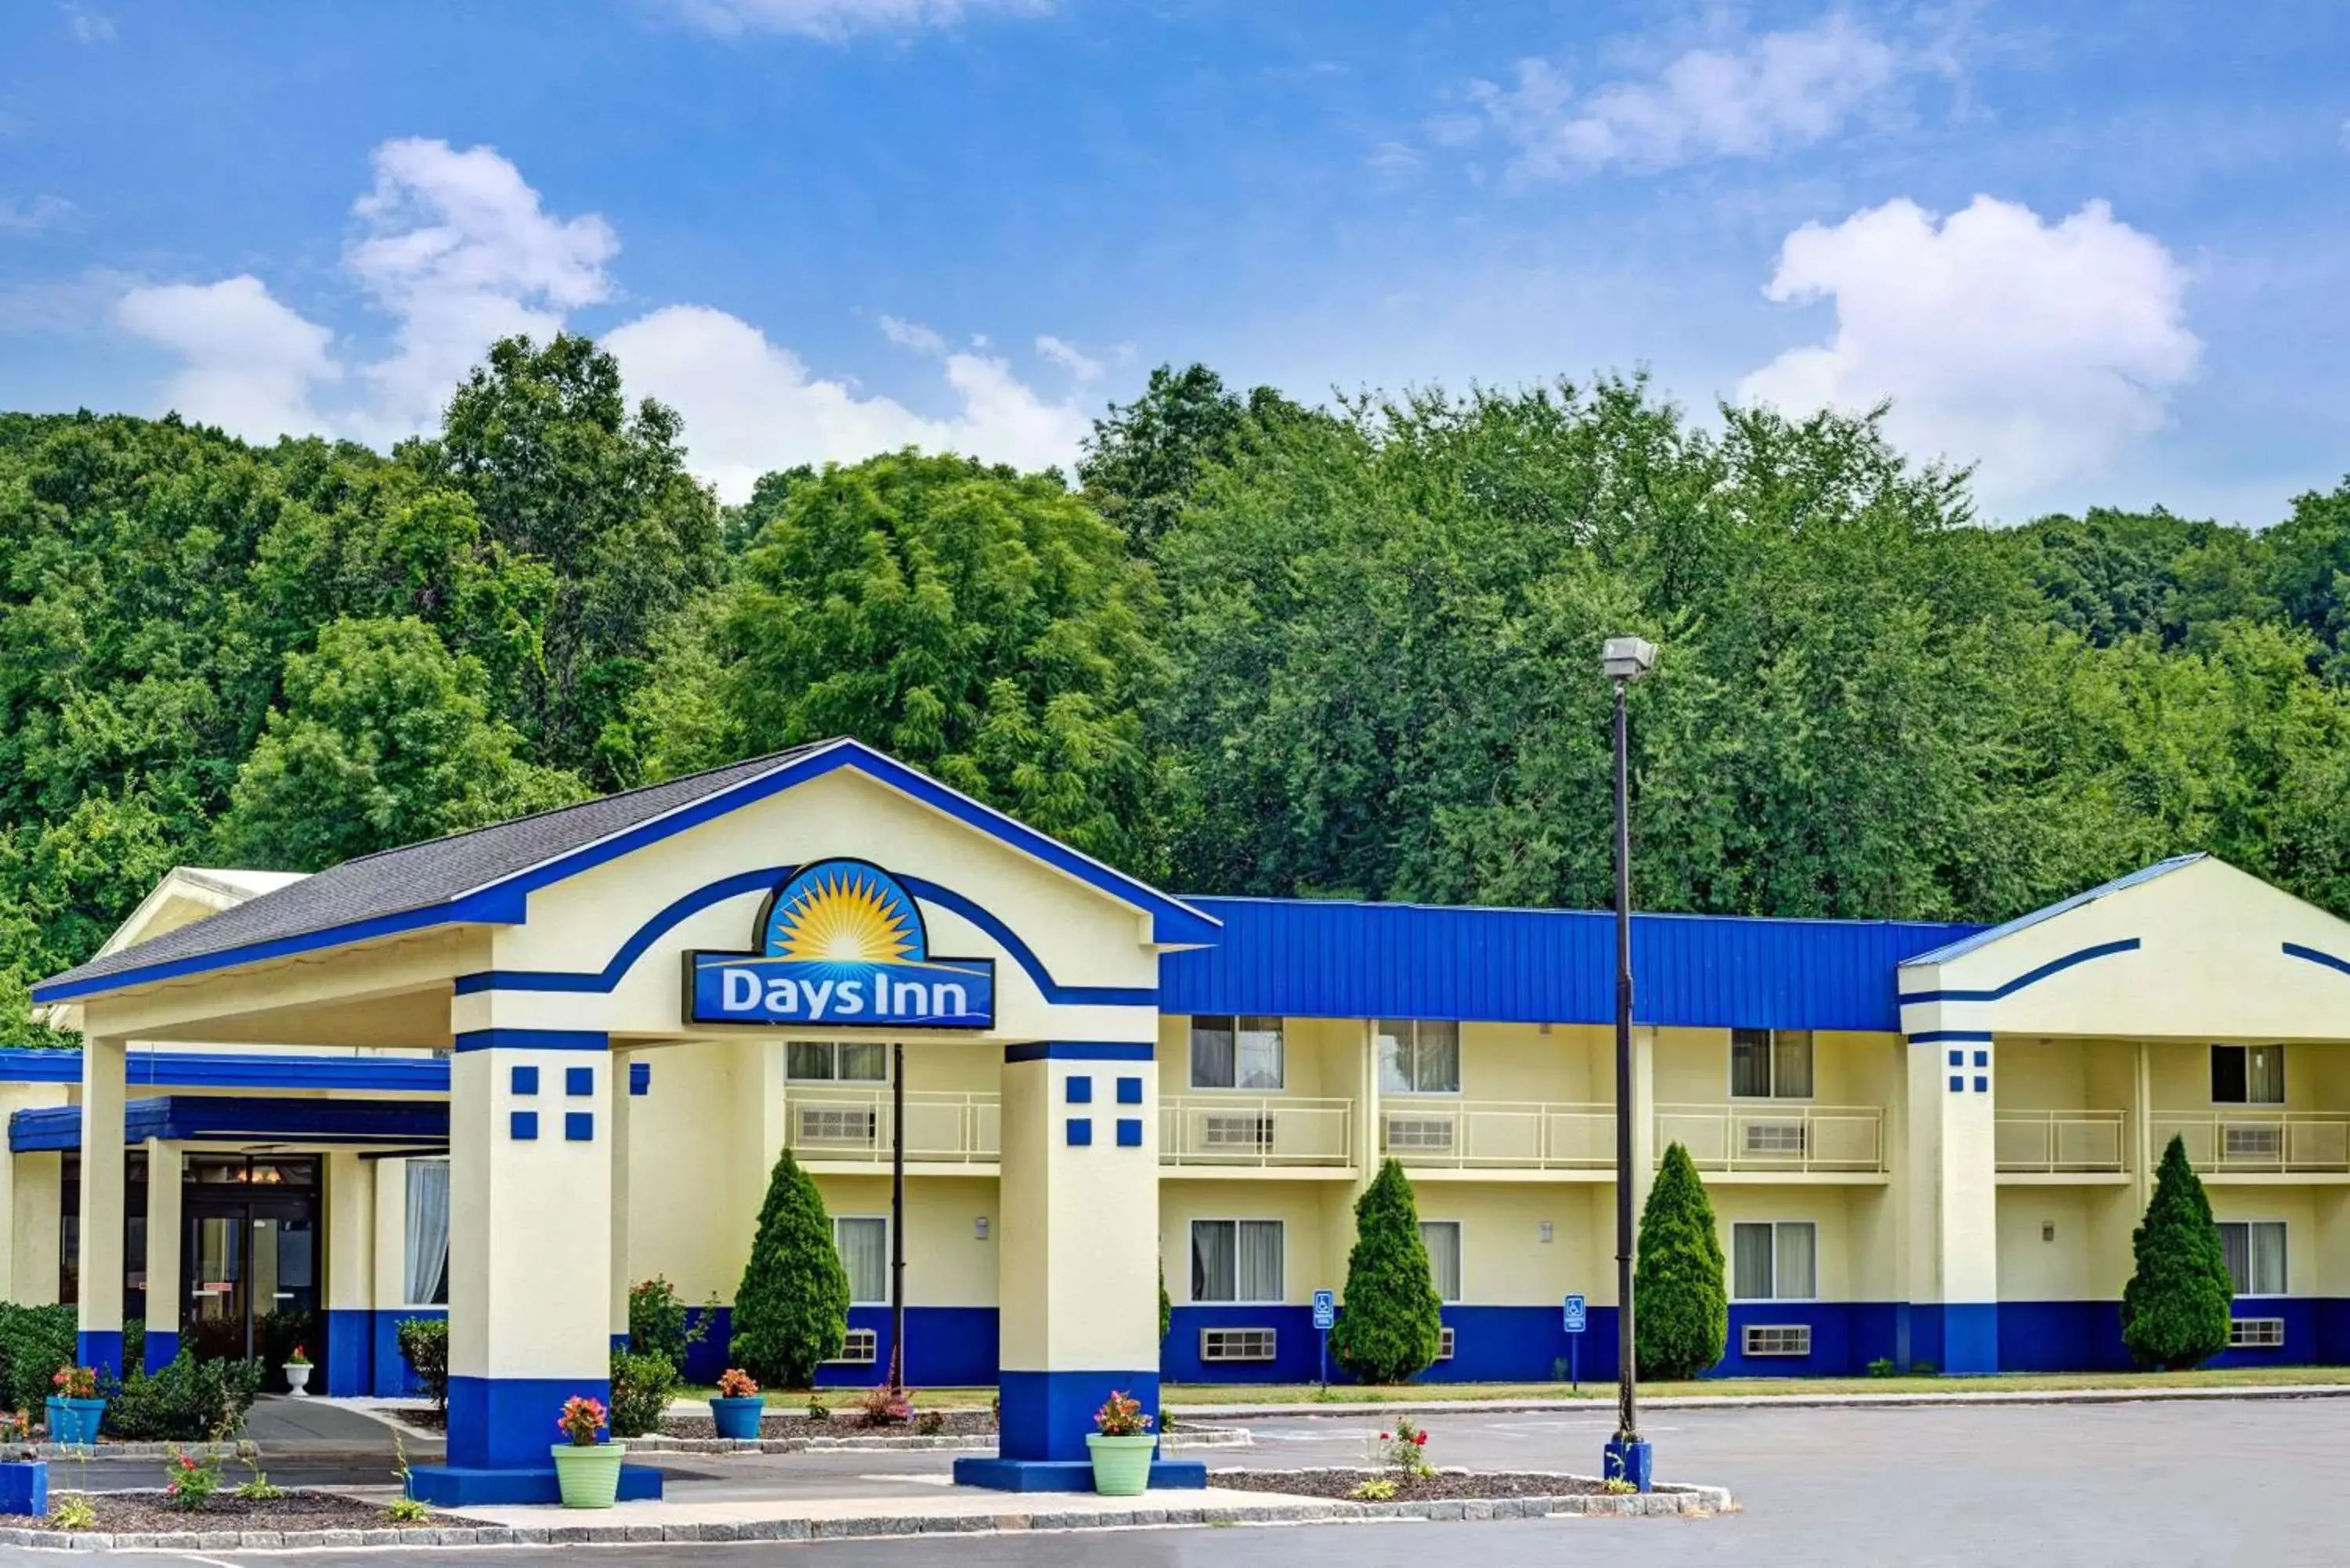 Property building in Days Inn by Wyndham Southington